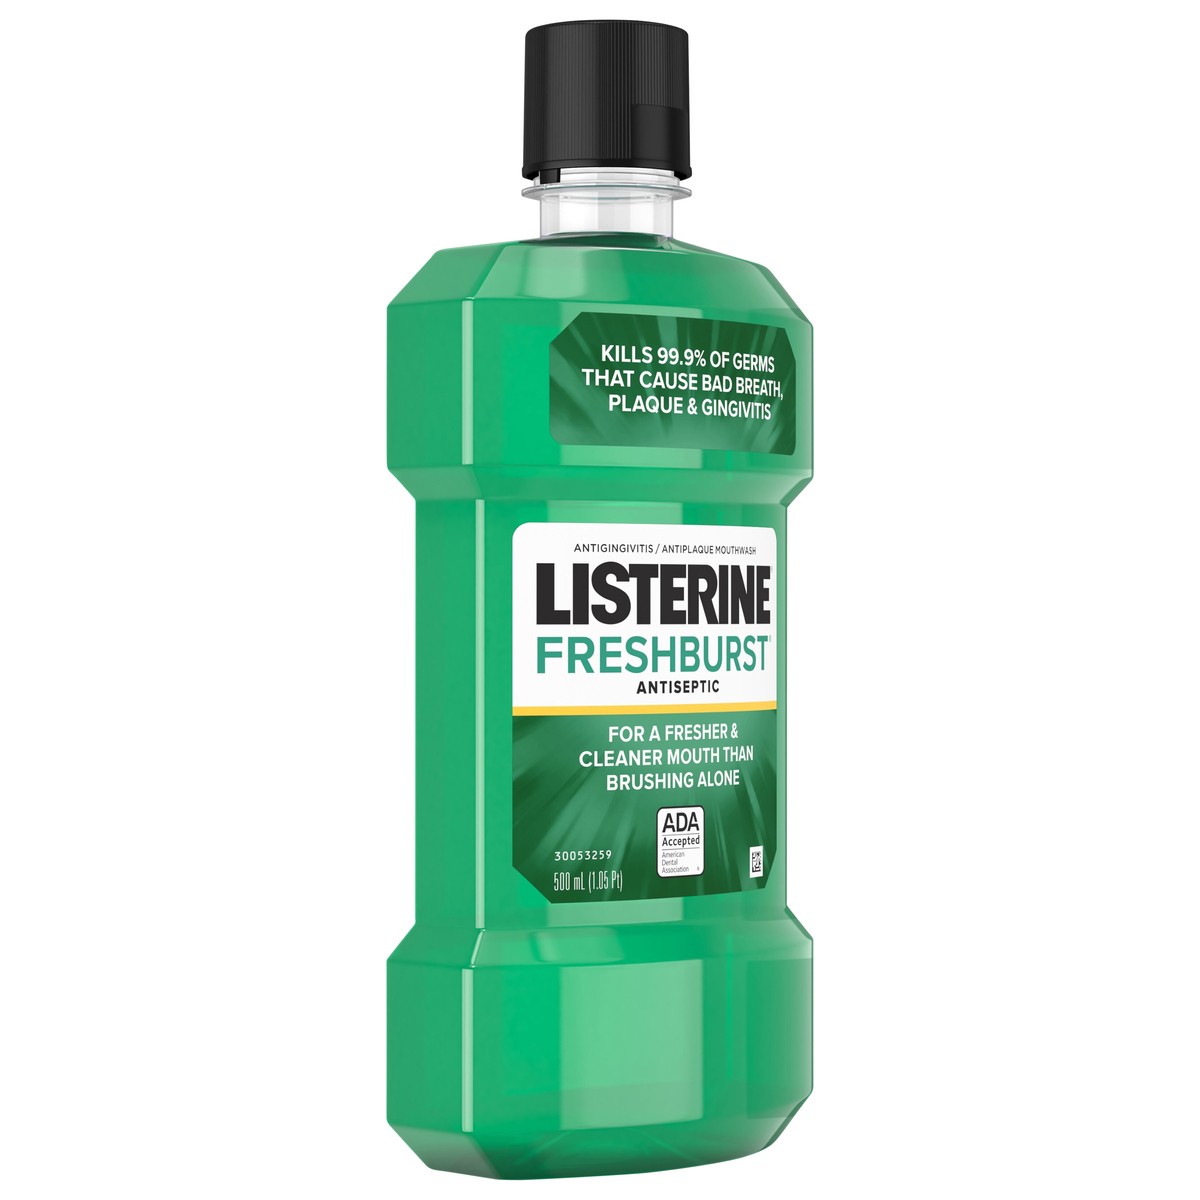 slide 3 of 12, Listerine Freshburst Antiseptic Mouthwash for Bad Breath, Kills 99% of Germs that Cause Bad Breath & Fight Plaque & Gingivitis, ADA Accepted Mouthwash, Spearmint, 500 mL, 500 ml